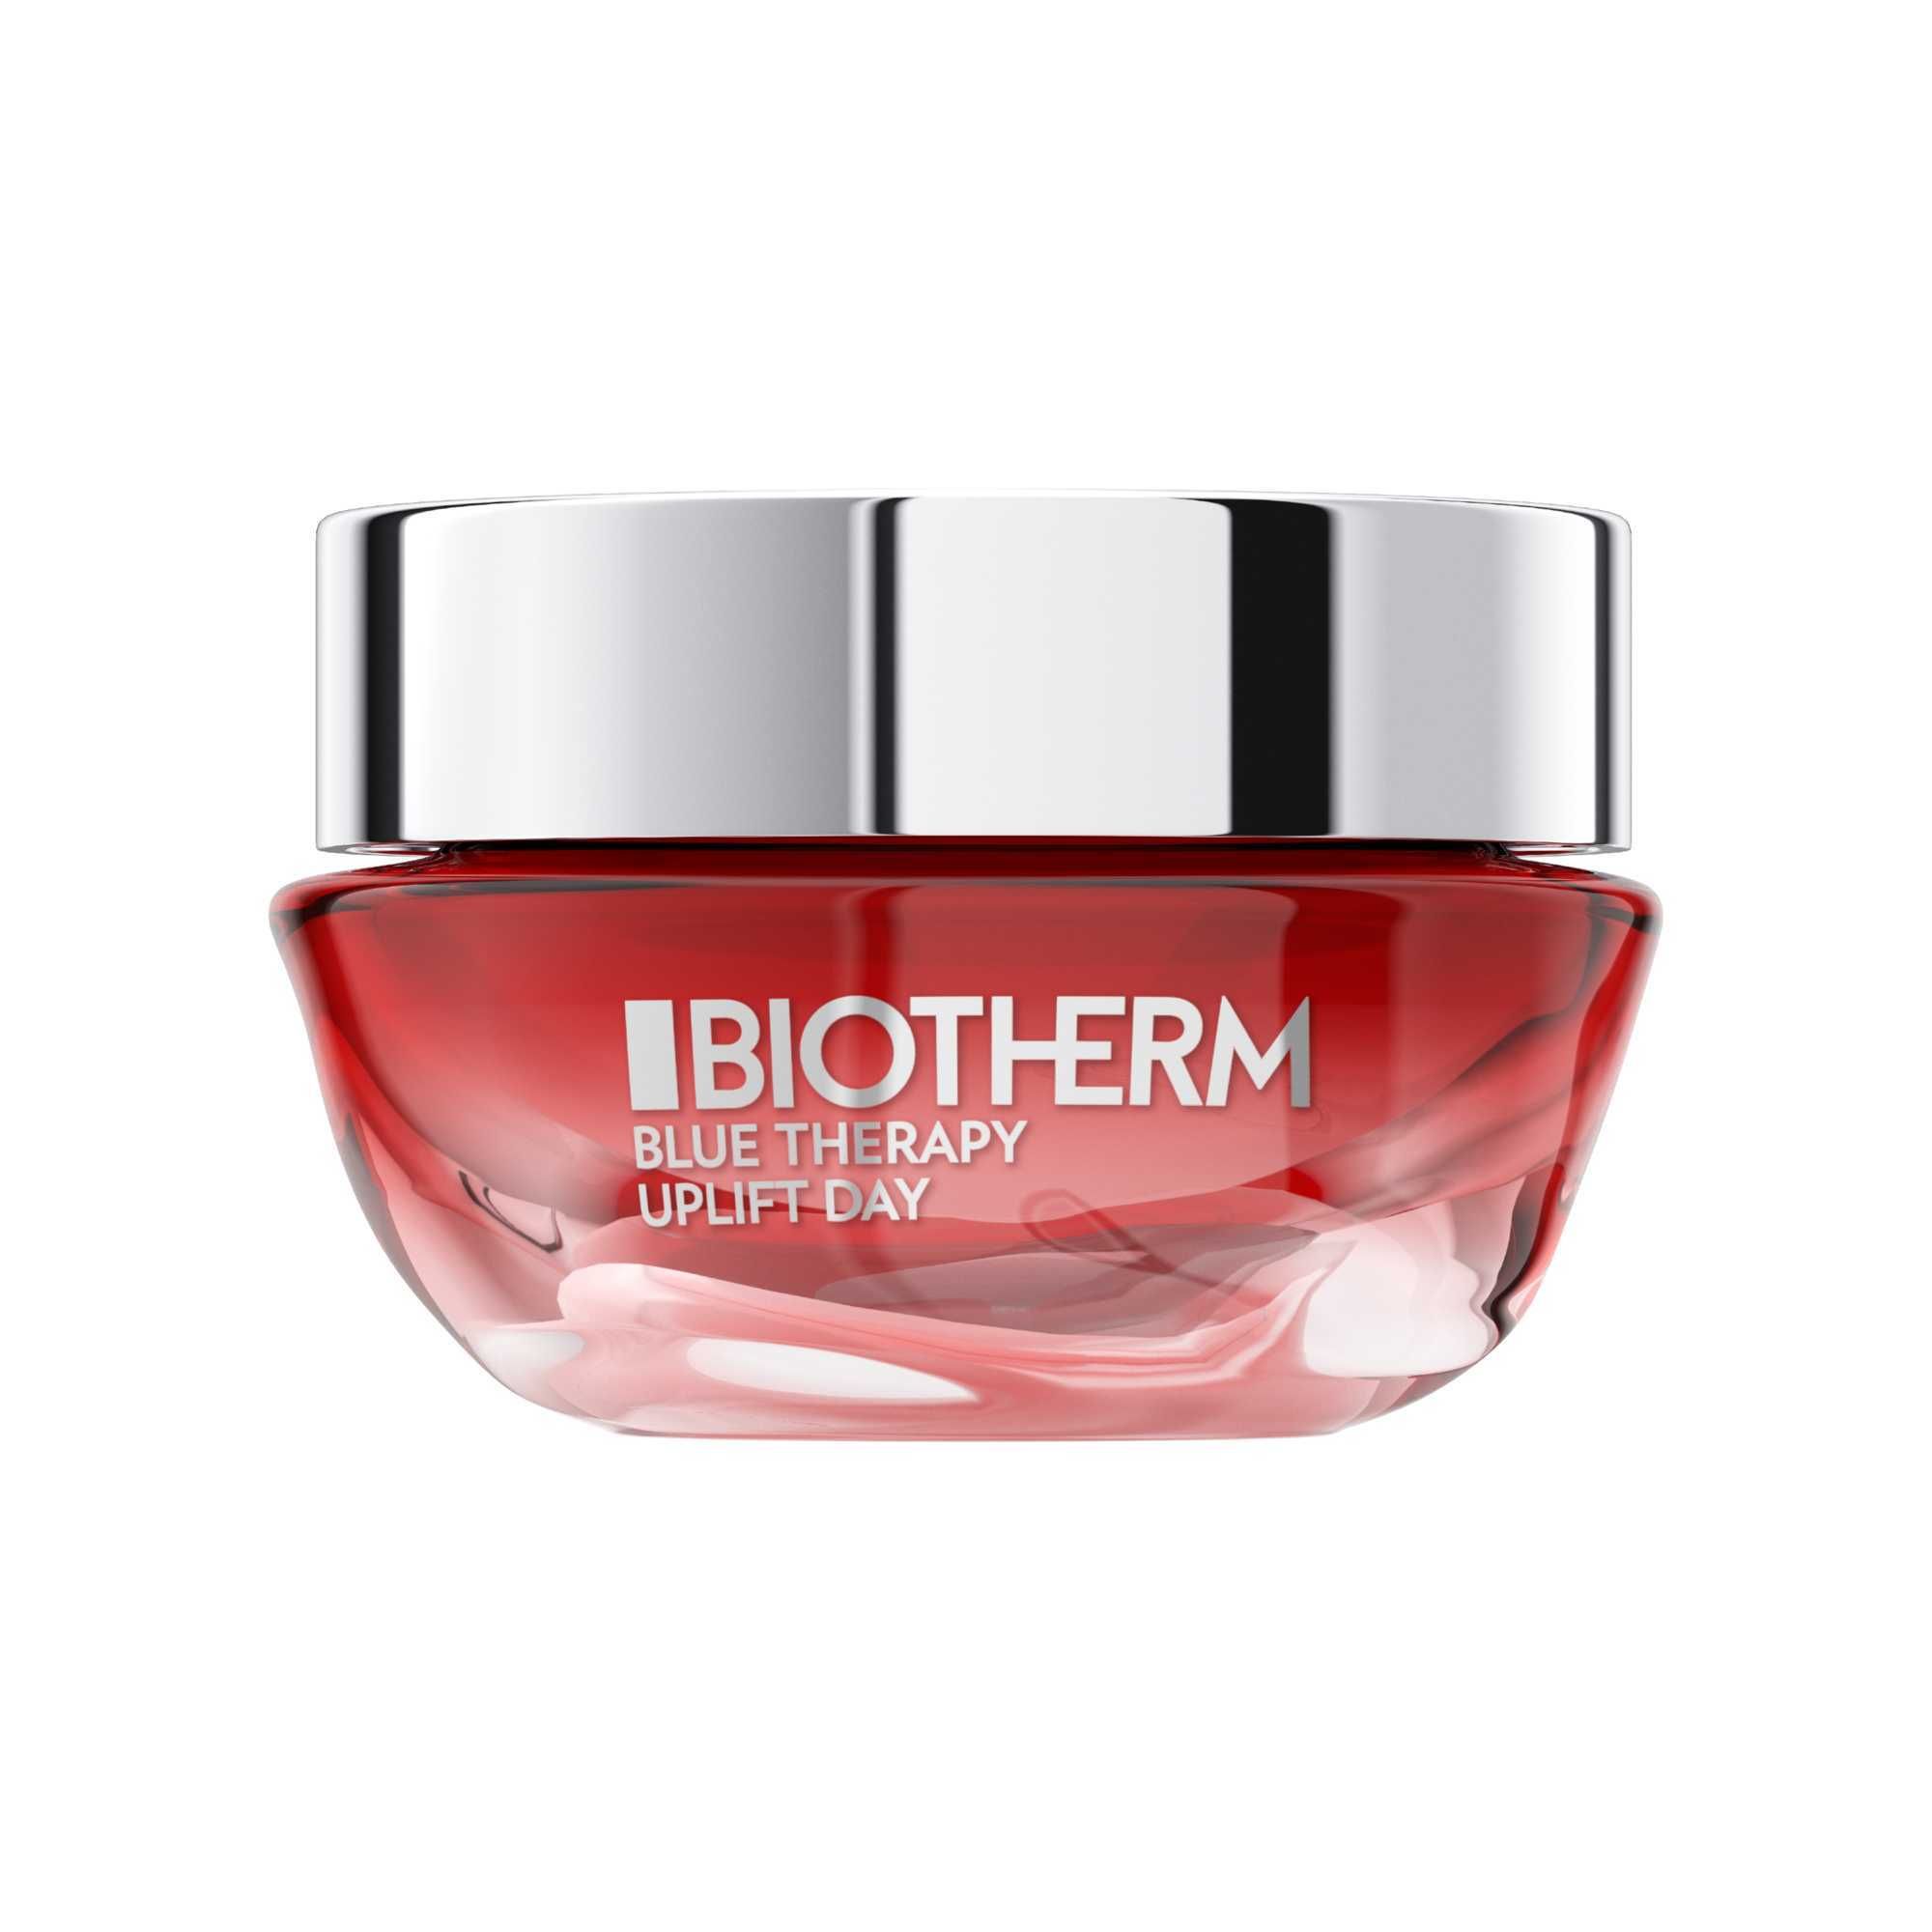 BIOTHERM BLUE THERAPY Red Algae Uplift Tagescreme